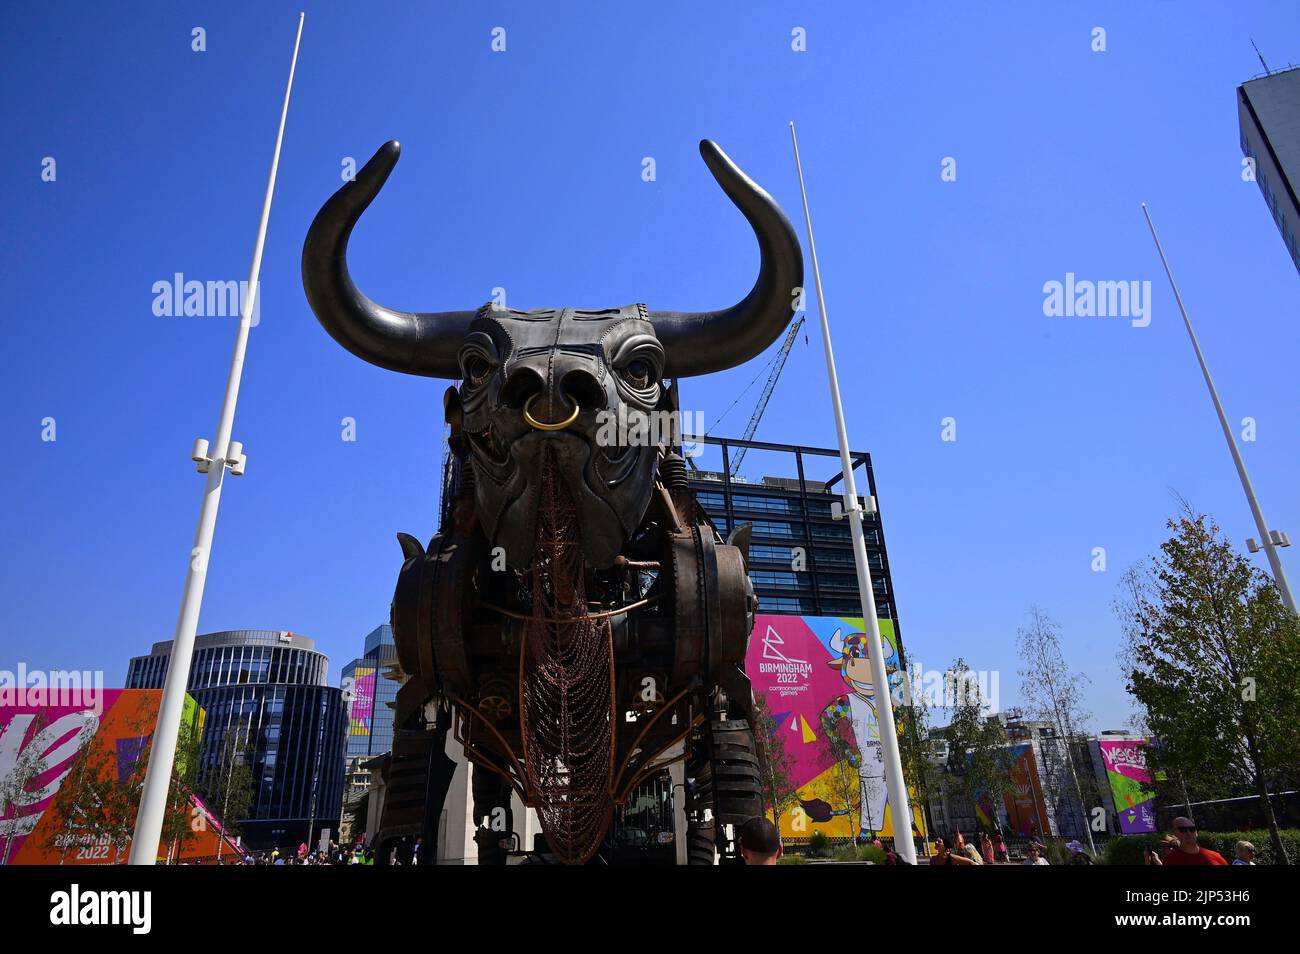 Birmingham Commonwealth Games 2022 The Raging Bull Banque D'Images